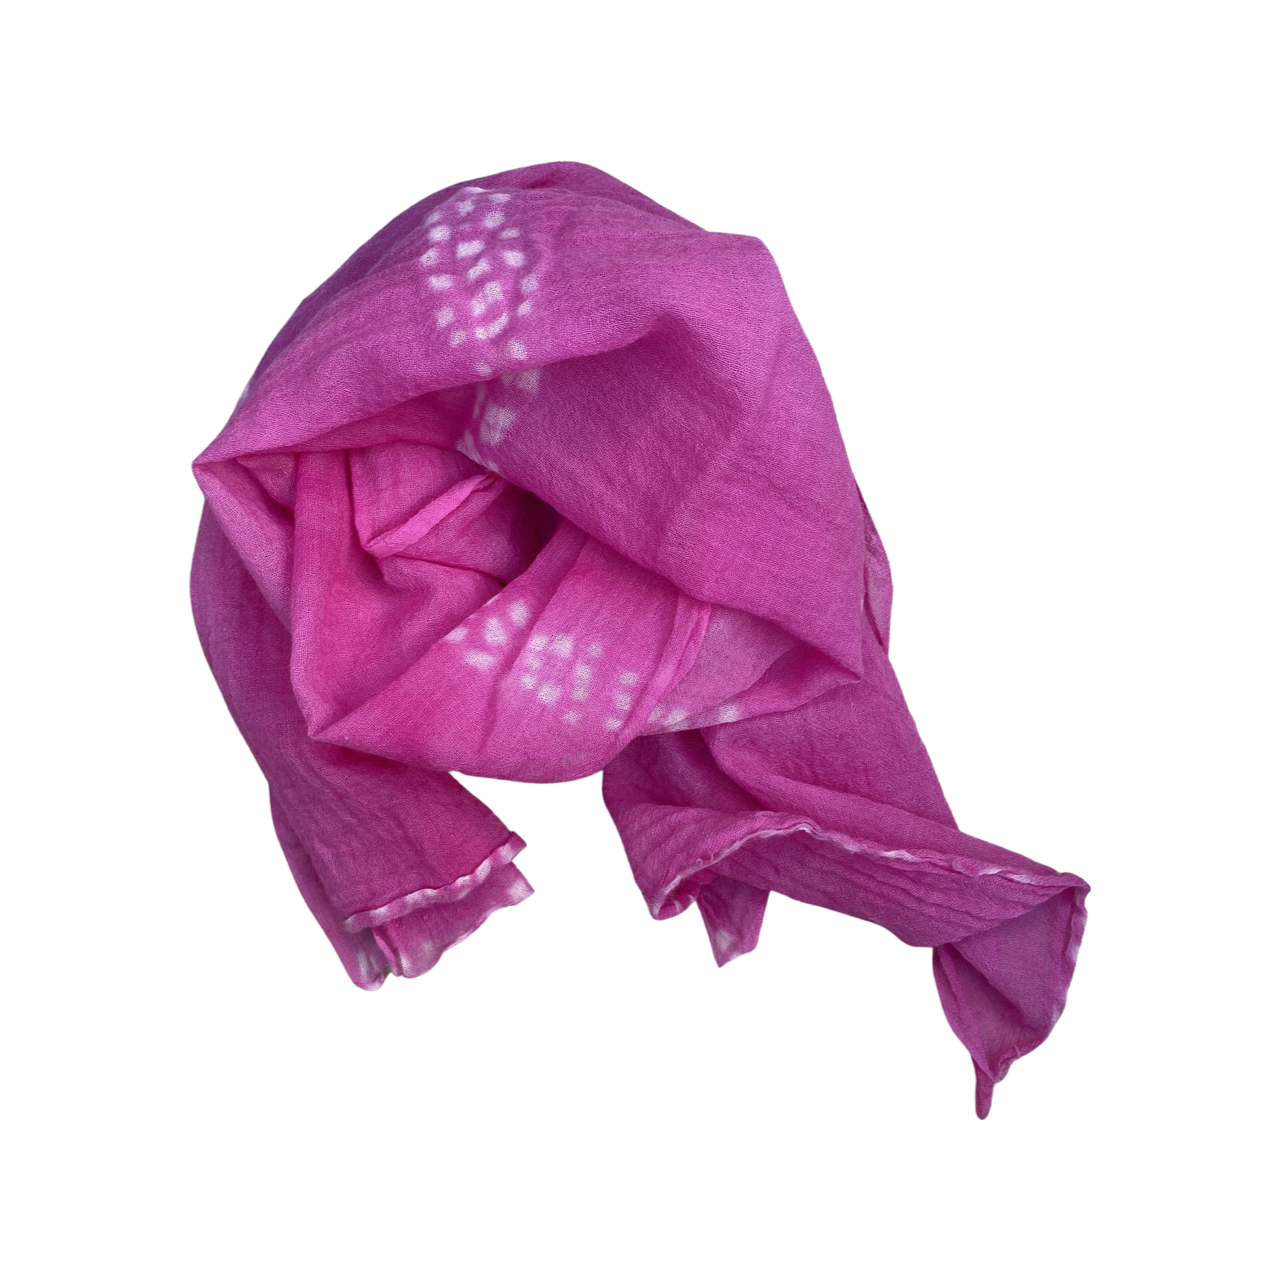 Patterned One-of-a-Kind Hand-Dyed Wool Gauze Scarf in Electric Orchid by 1 Life - Hand-Dyed Wool Scarf for Warm or Cold Weather